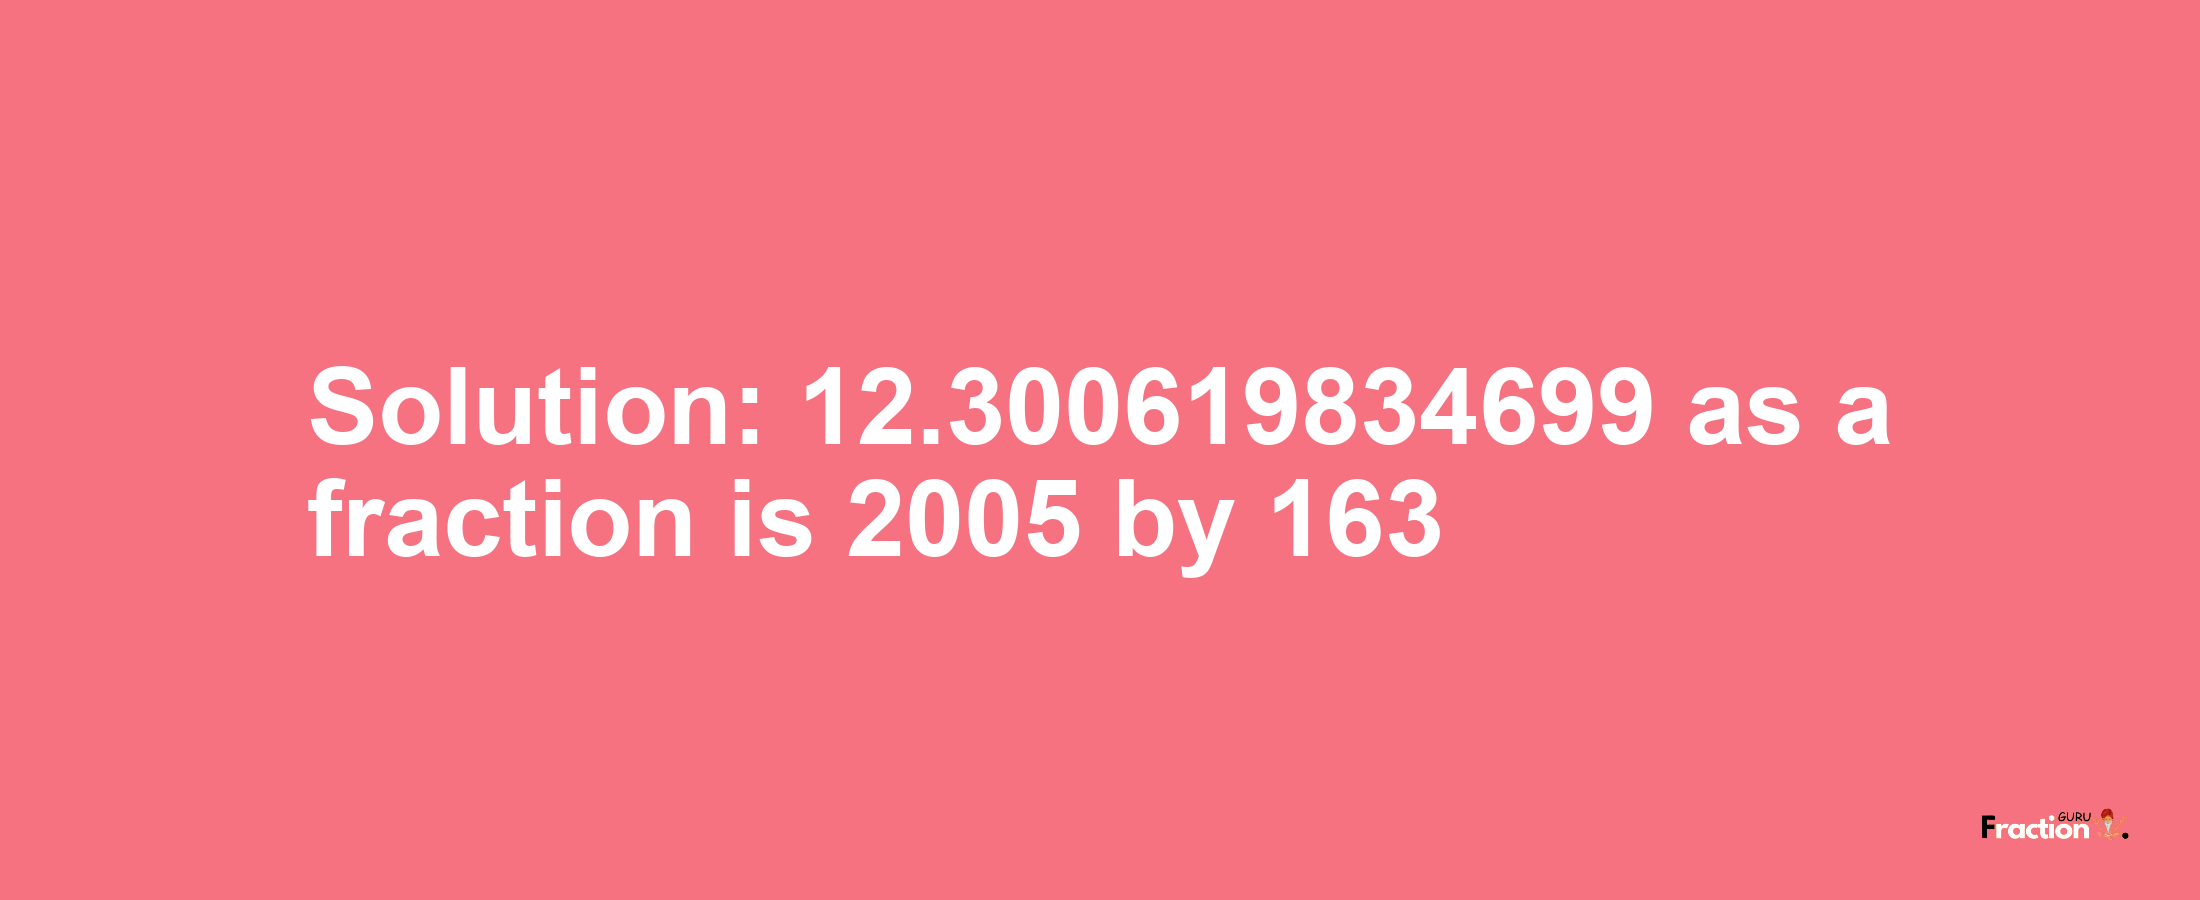 Solution:12.300619834699 as a fraction is 2005/163